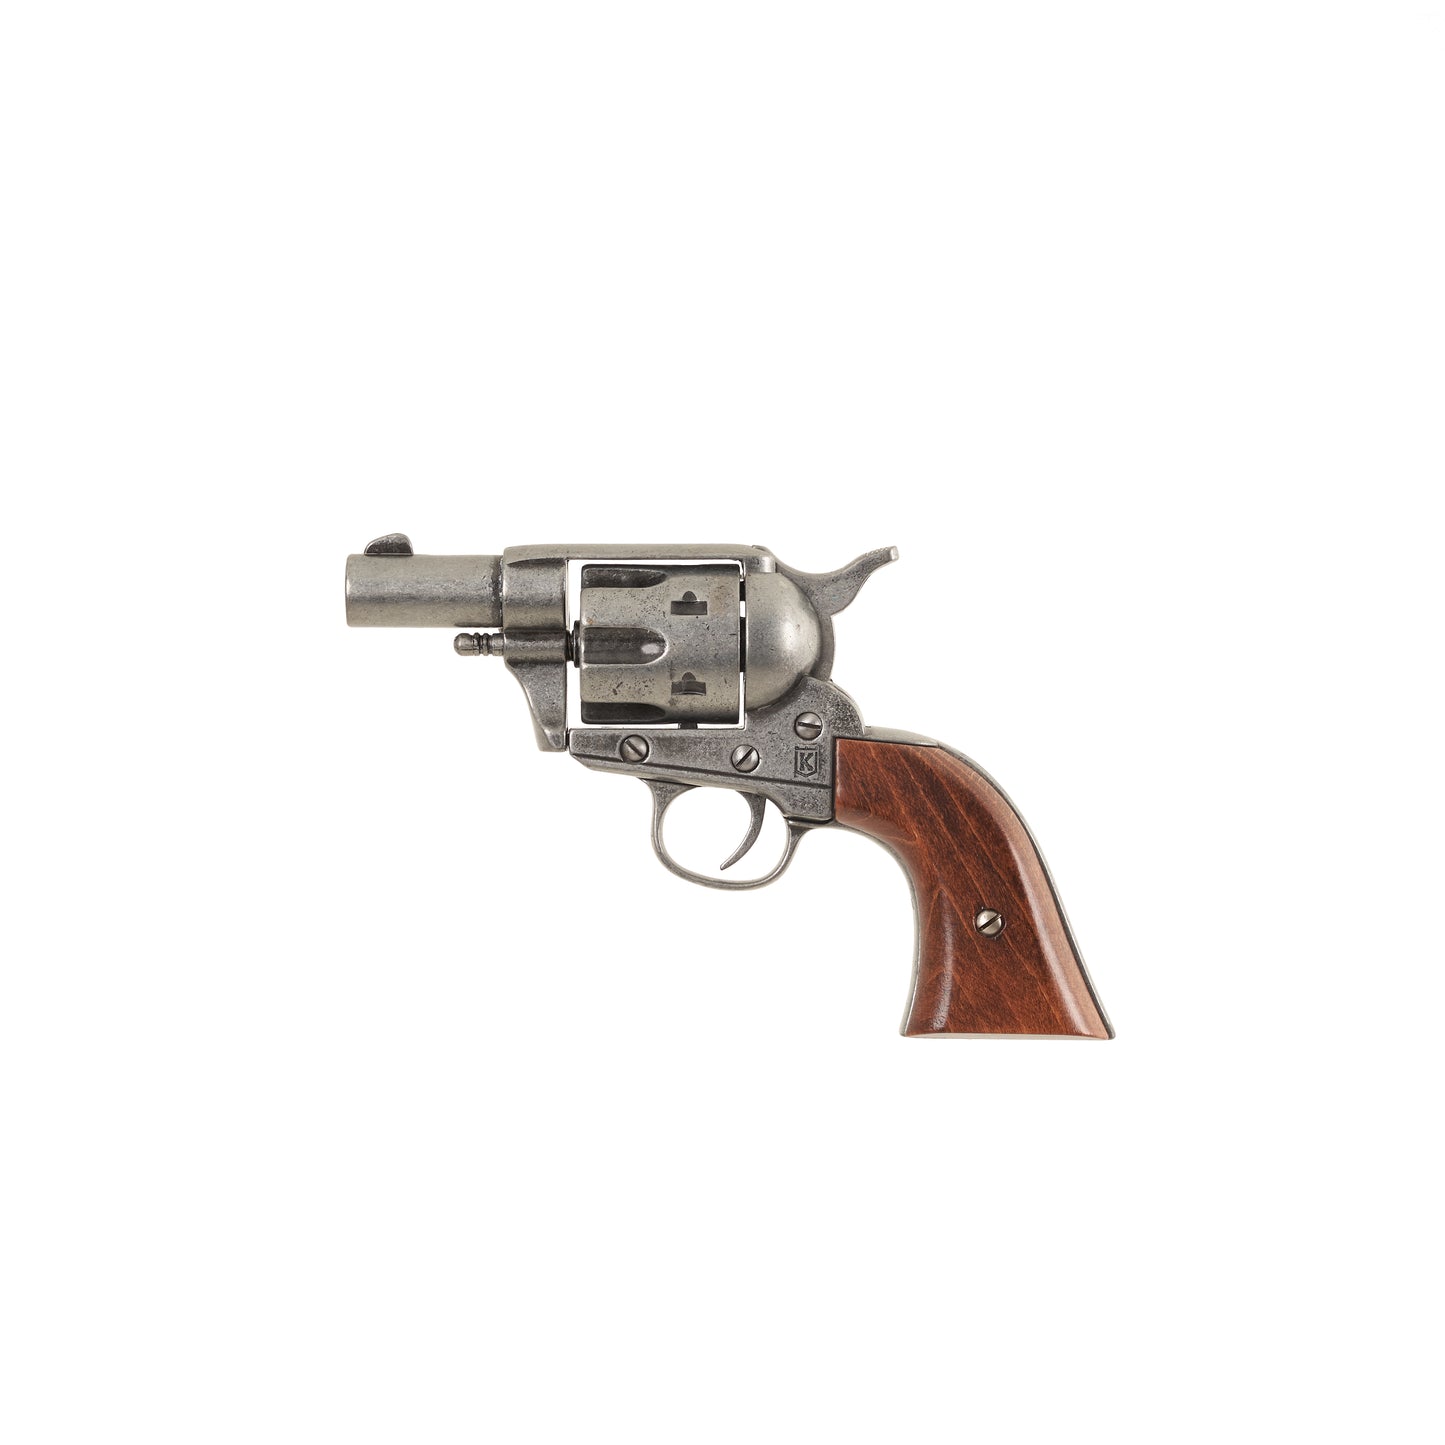 Left side view of gray Non-Firing 1873 .45 Caliber Short Revolver with striped wood grip.